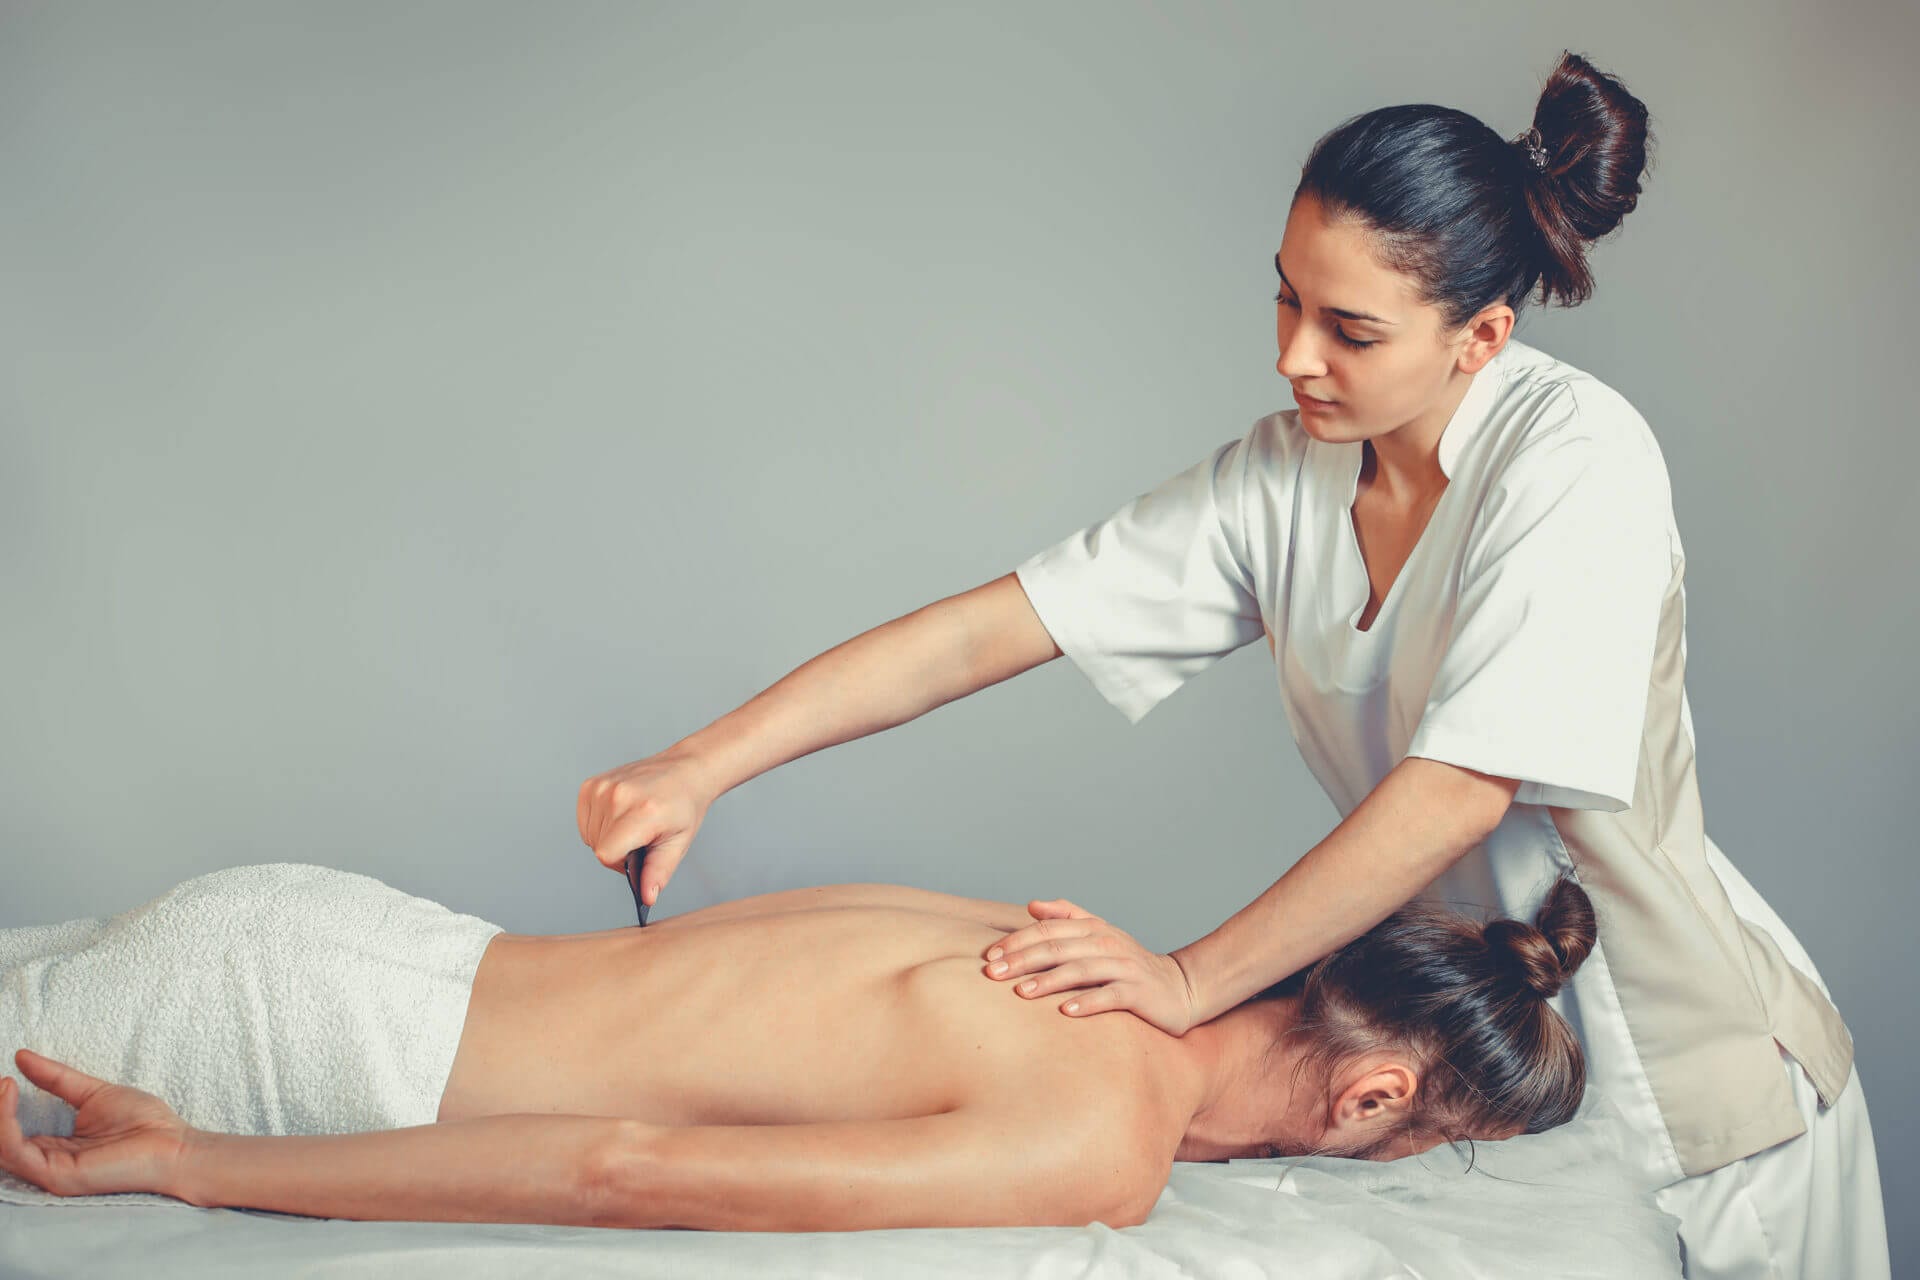 What is integrative massage?